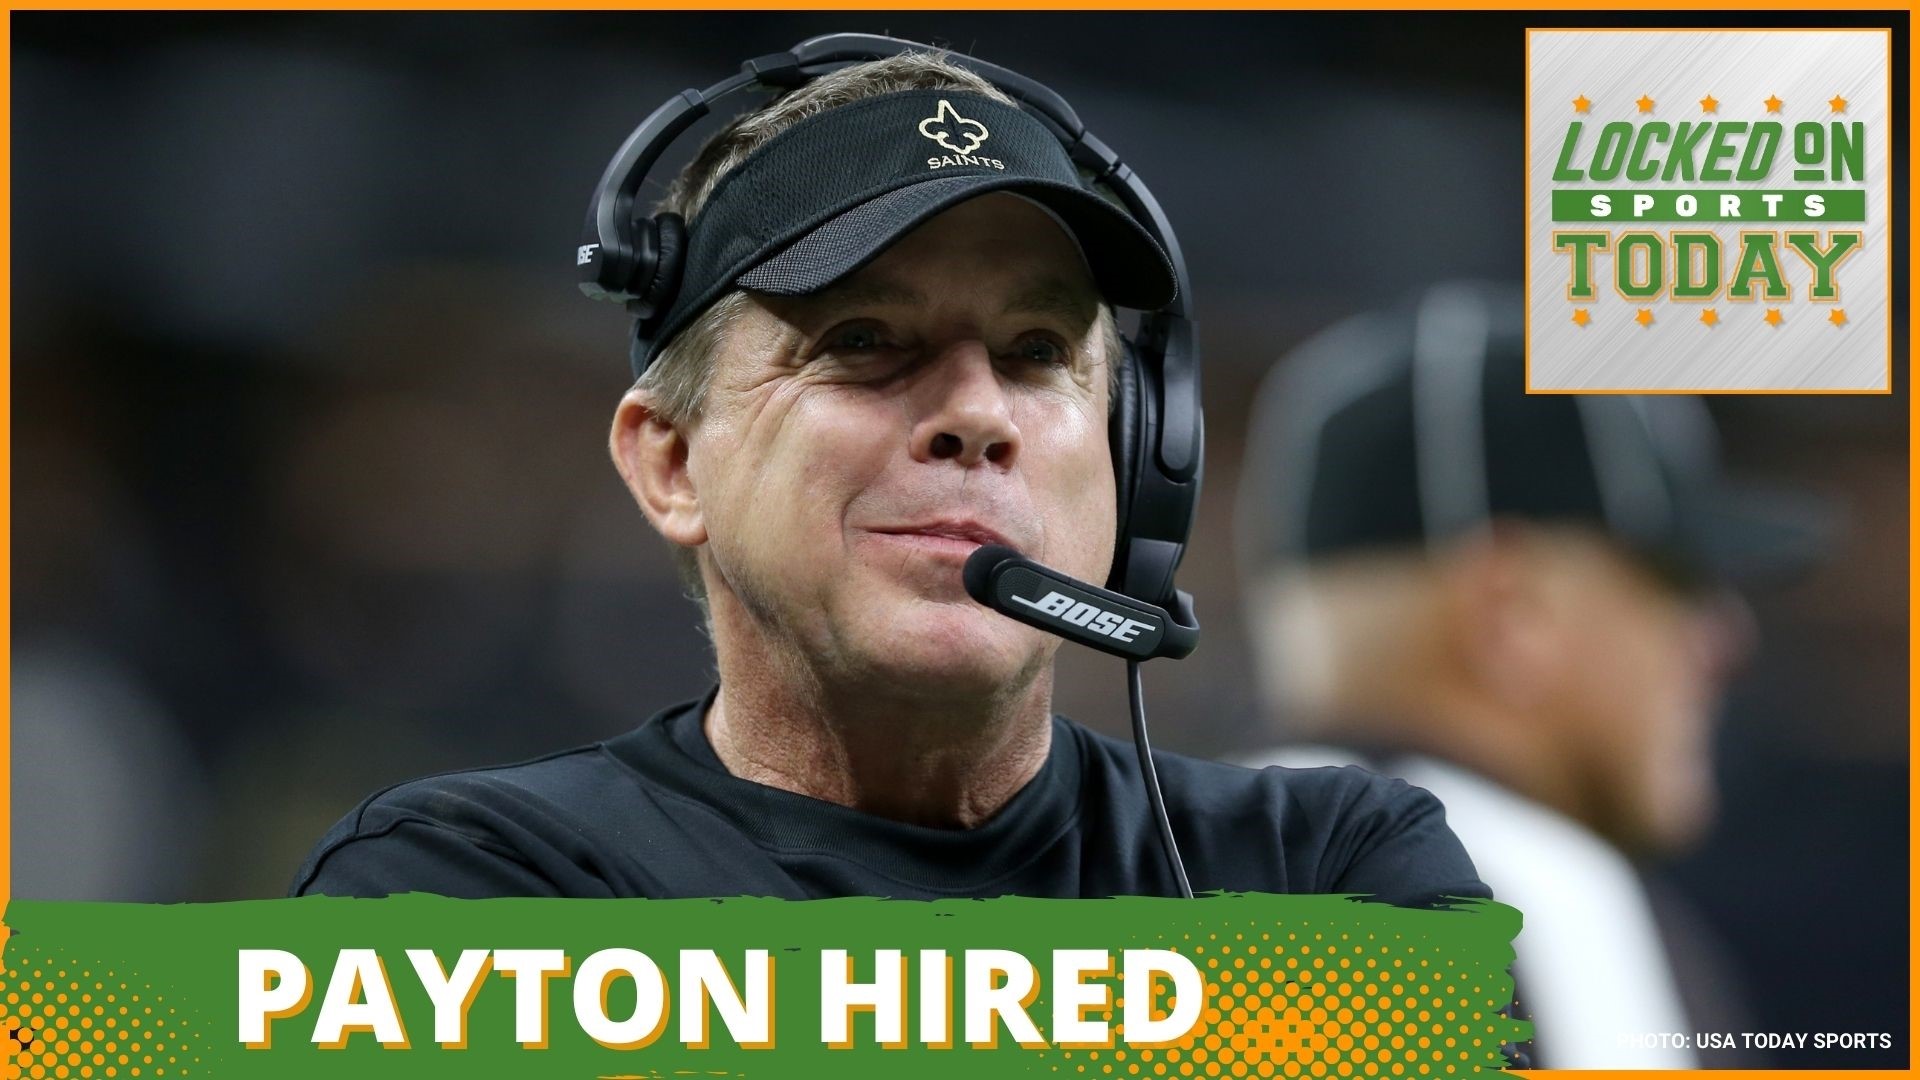 Discussing the day's top sports stories from the Texans landing one of the hottest coaching candidates on the market and the Saints have what they need to contend.